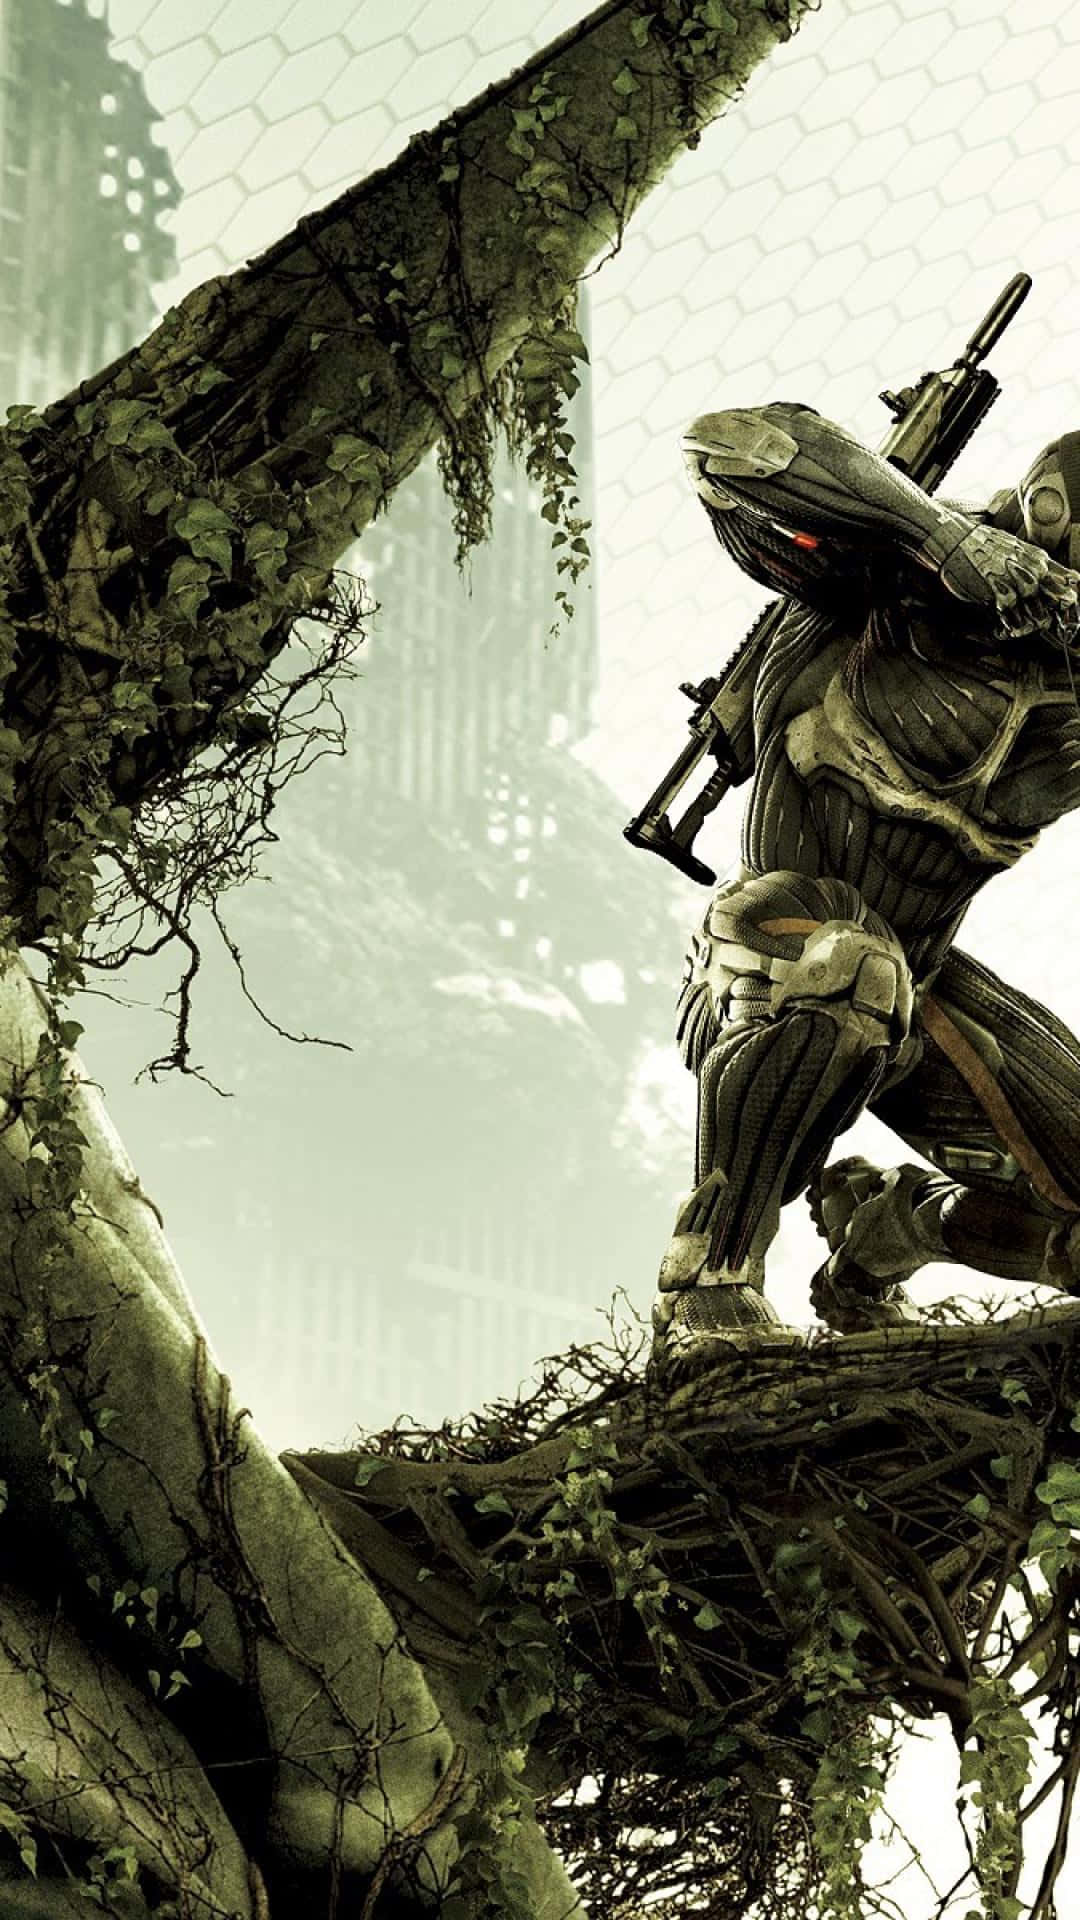 Explore the mysterious city of New York in Crysis 3 Wallpaper